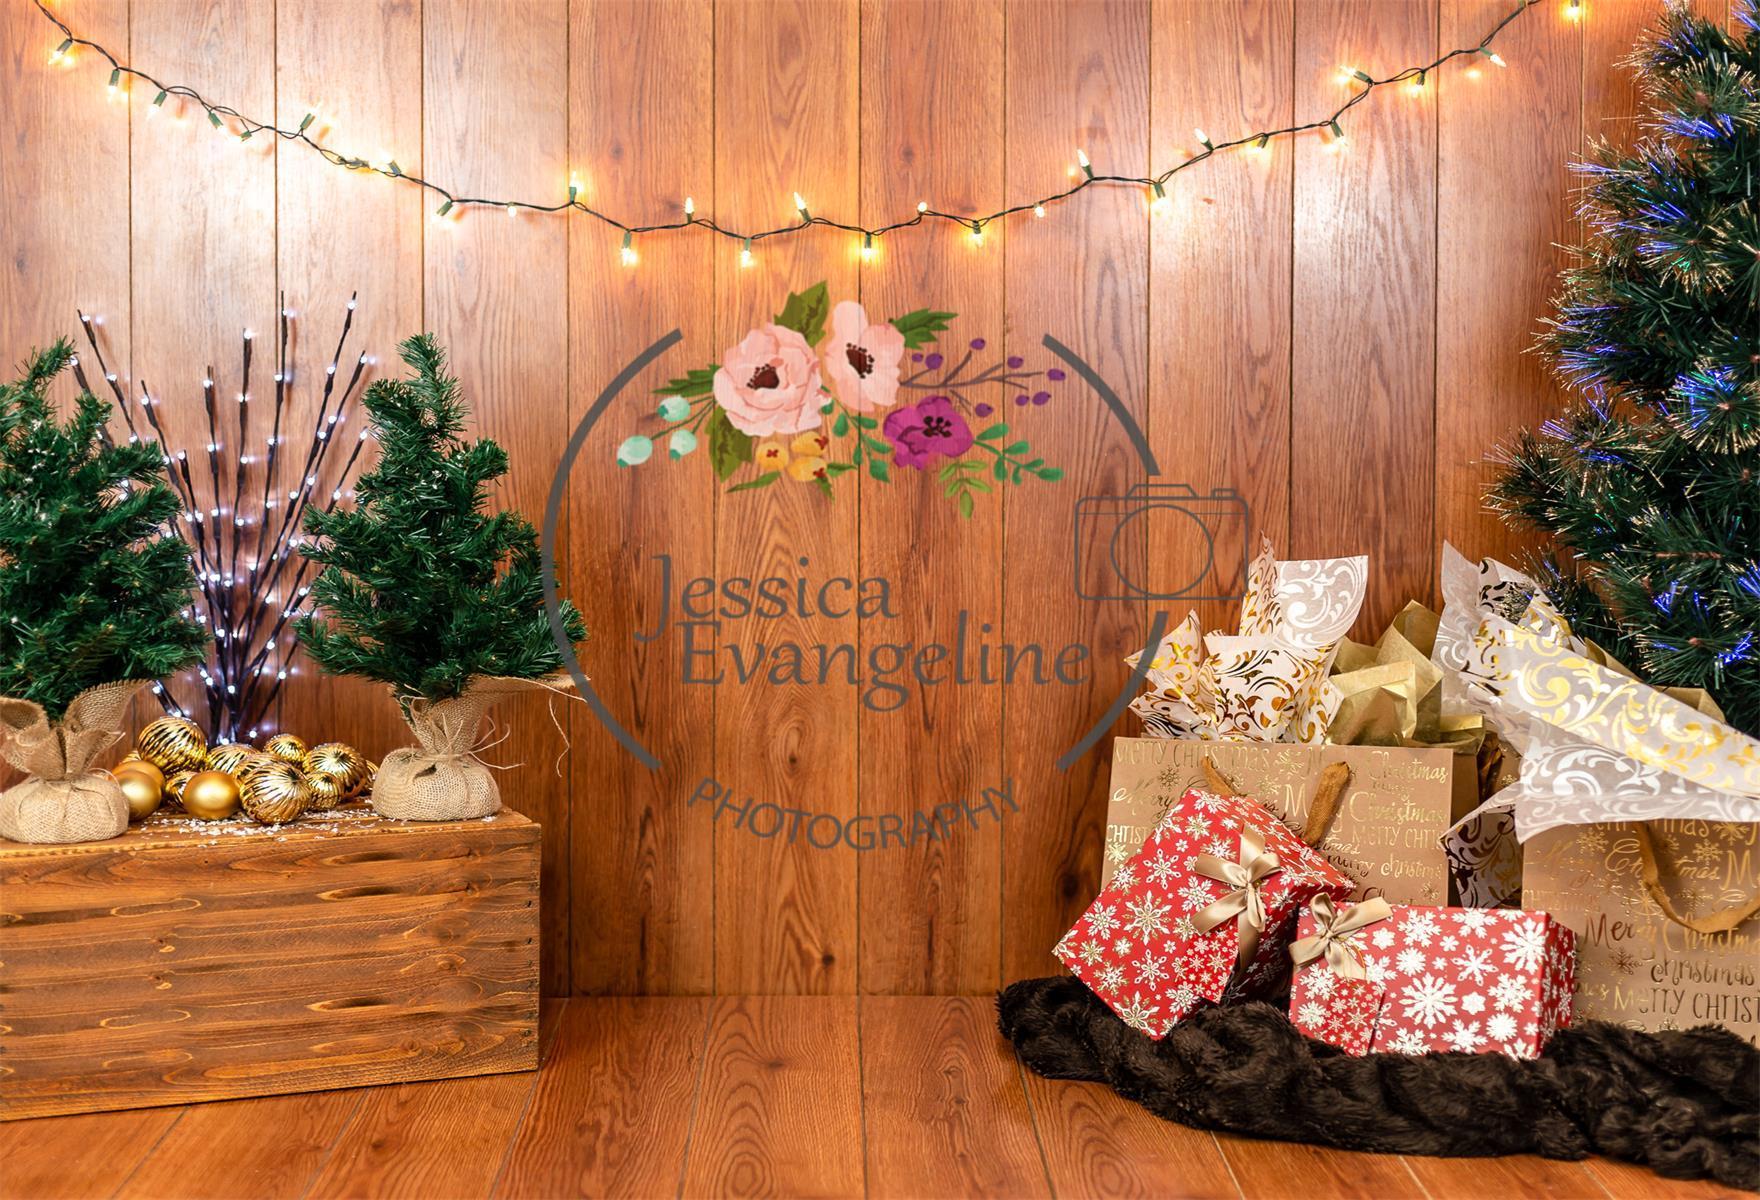 Kate Christmas Tree Wooden Backdrop for Photography Designed By Jessica Evangeline photography